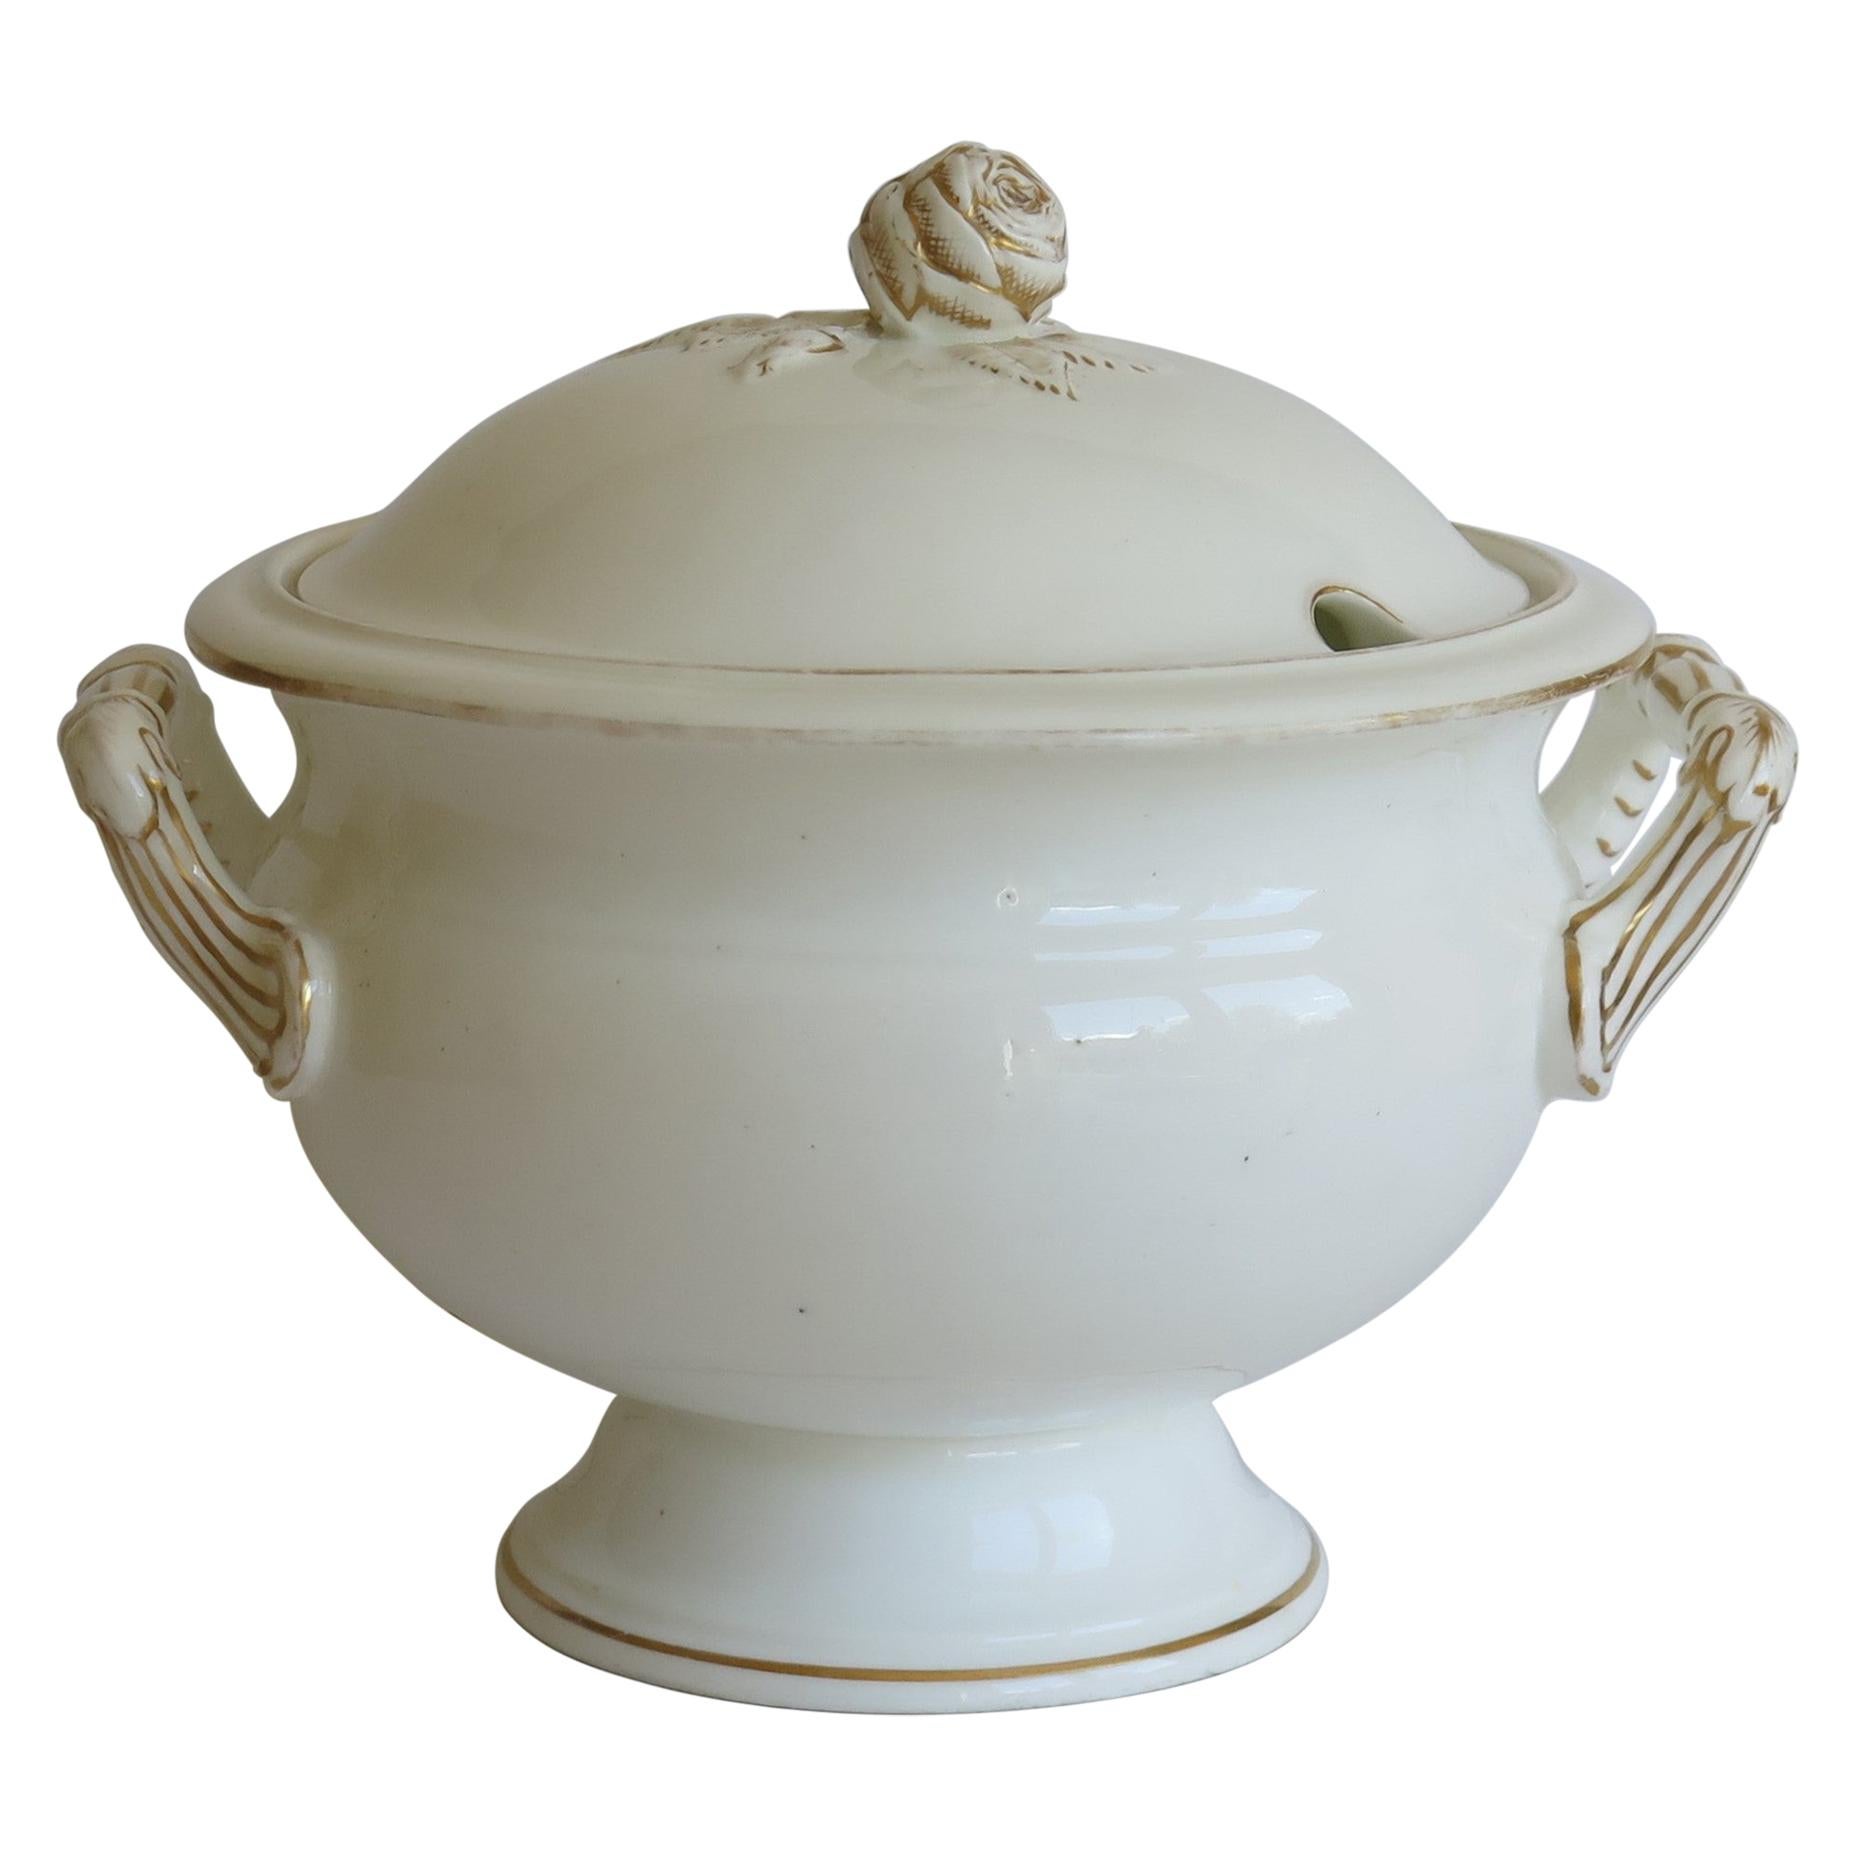 This is a very good large Lidded Tureen, made of porcelain, which we date to the first half of the 19th century, circa 1830.

The tureen is well potted with a circular footed base and two moulded side handles. The circular lid has a moulded Leaf &